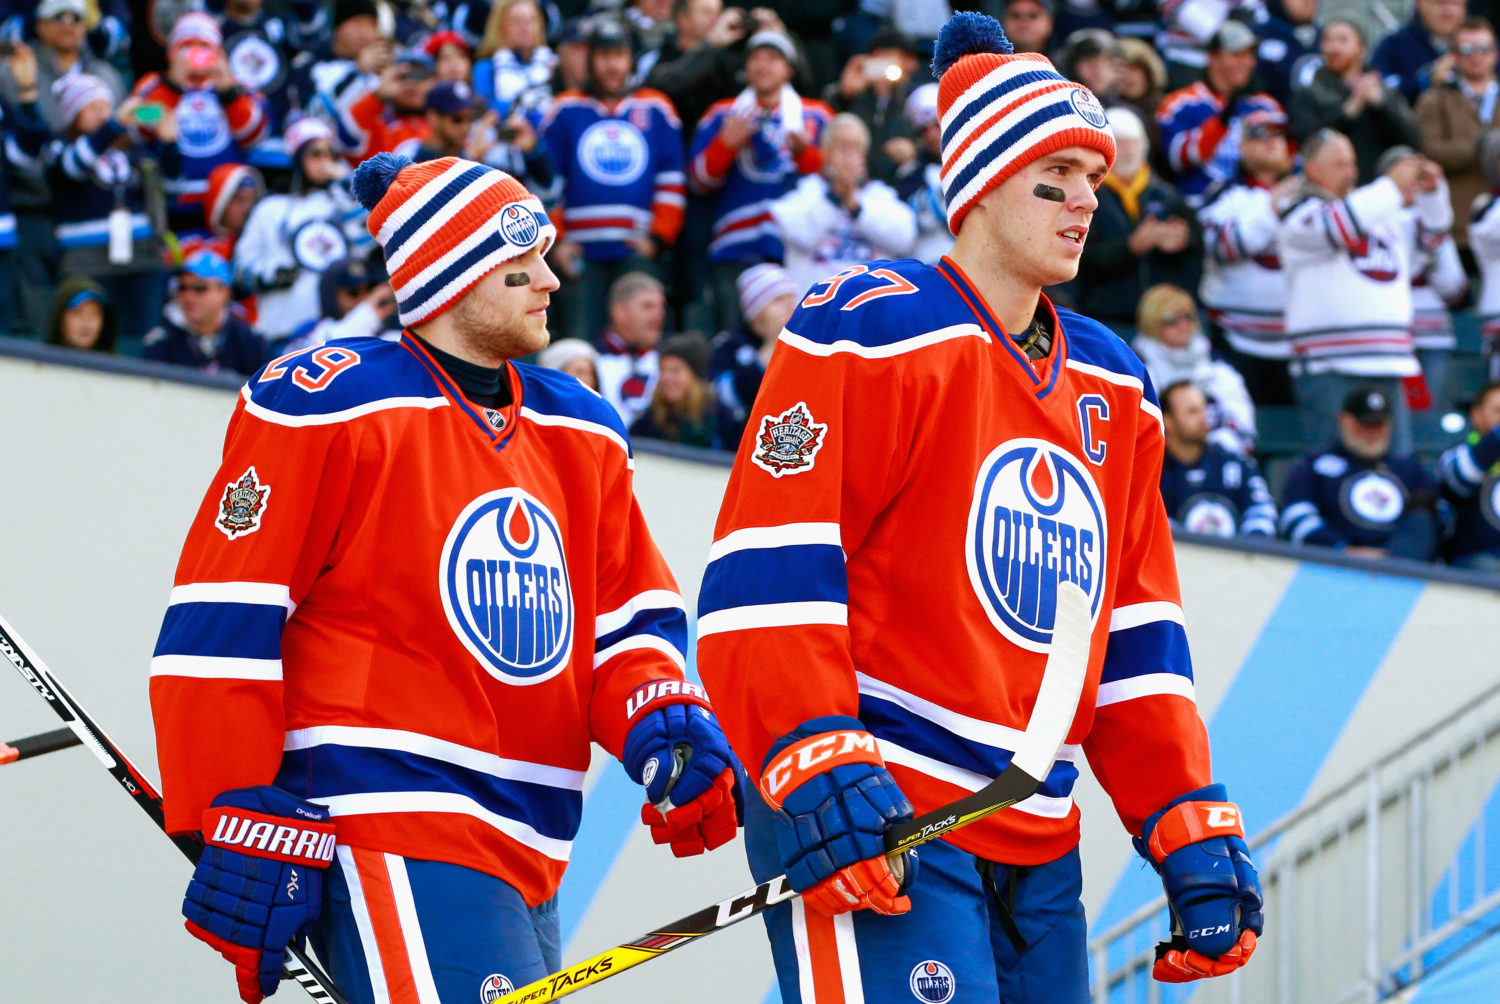 Oilers take Heritage Classic, but fans make Jets coach proud to be